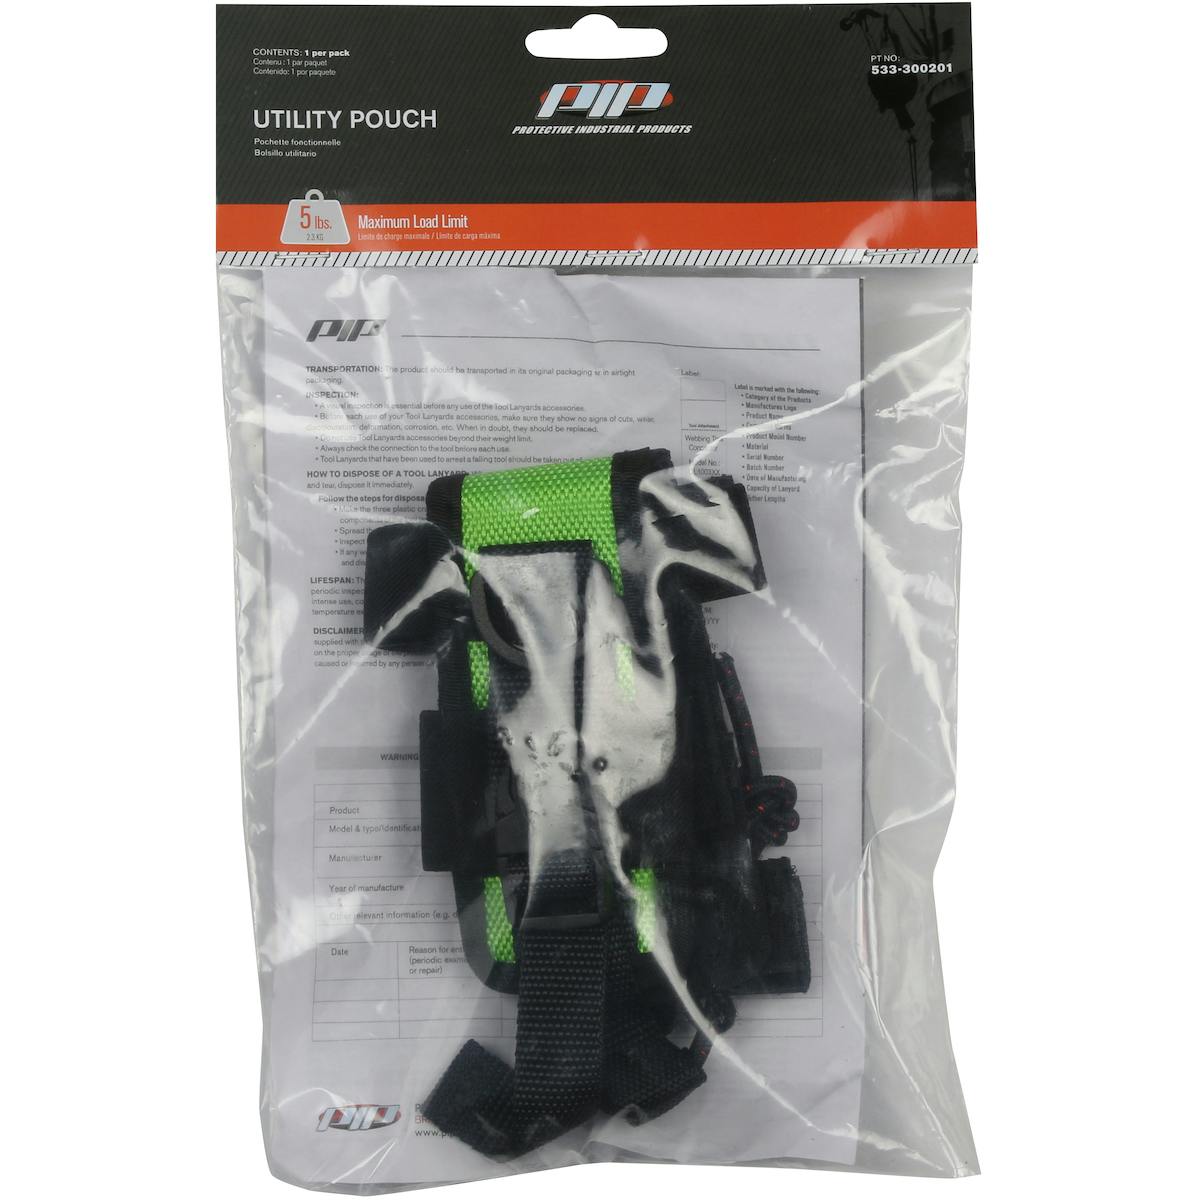 Tool Tethering Utility Pouch - 5 lbs. maximum load limit - Retail Packaged, Green (533-300201) - OS